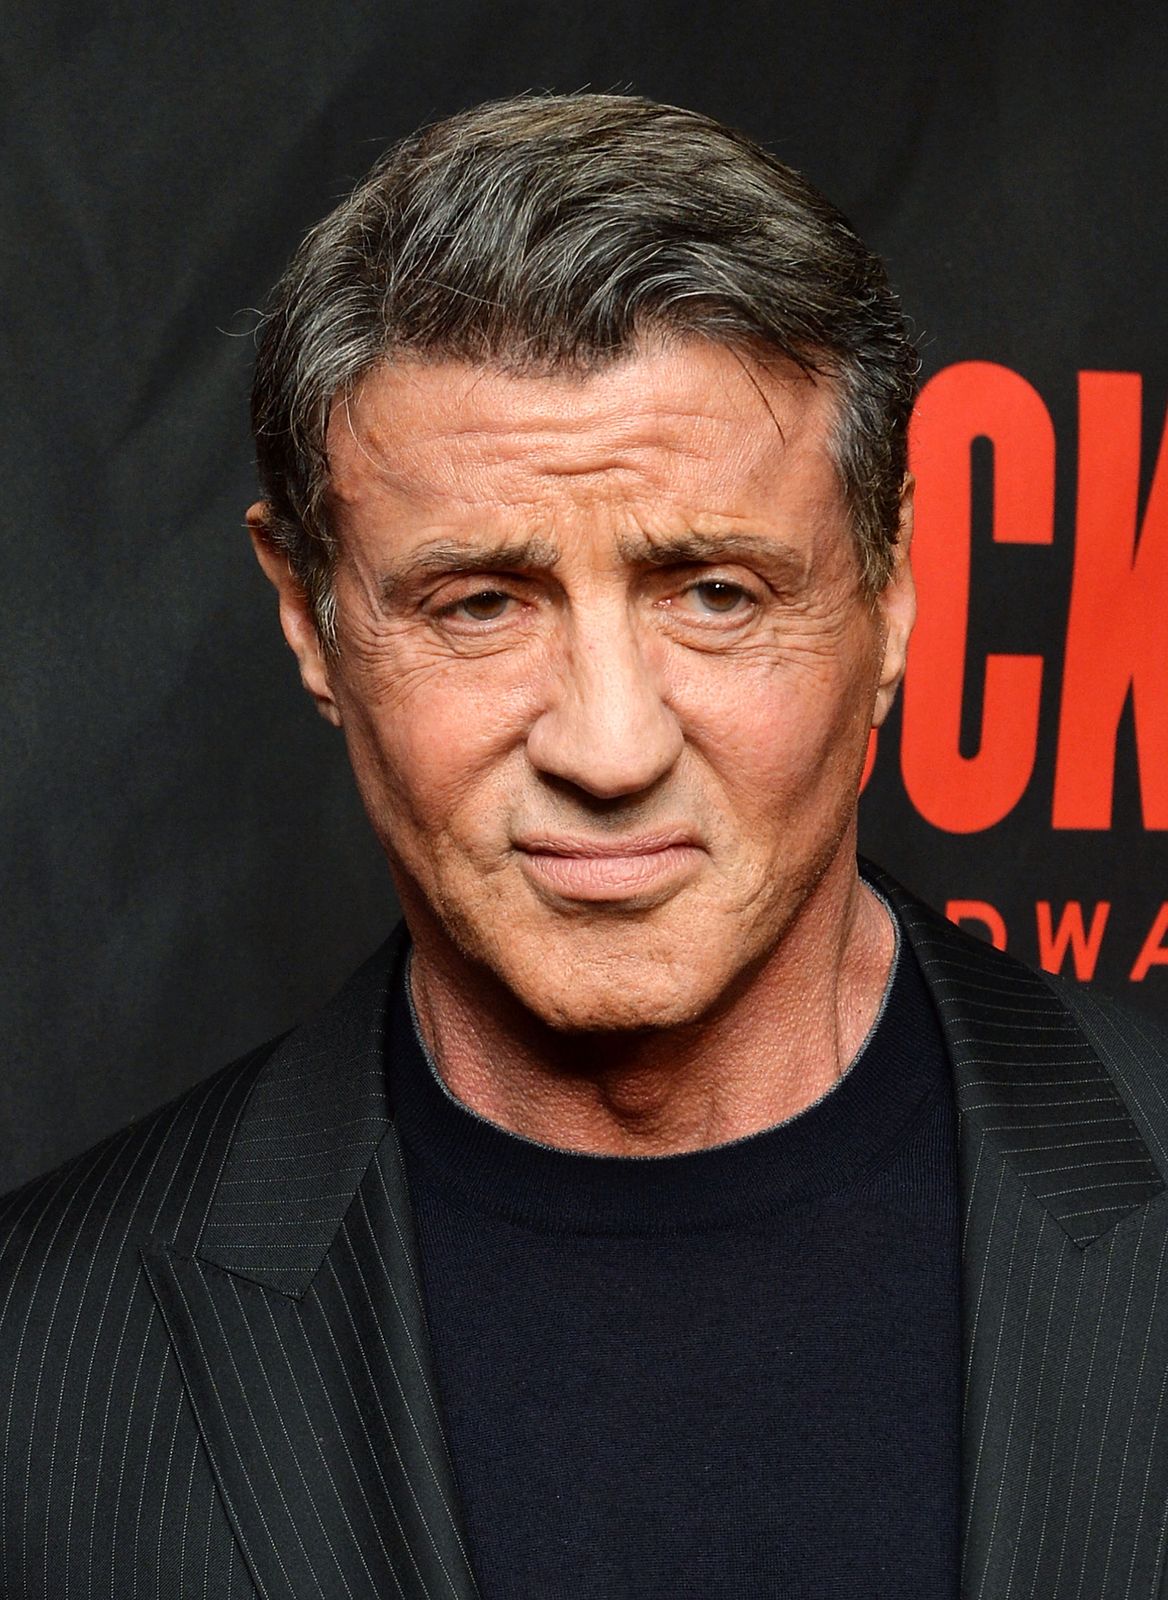  Actor Sylvester Stallone at the "Rocky" Broadway opening night after party at Roseland Ballroom on March 13, 2014 in New York City. | Source: Getty Images